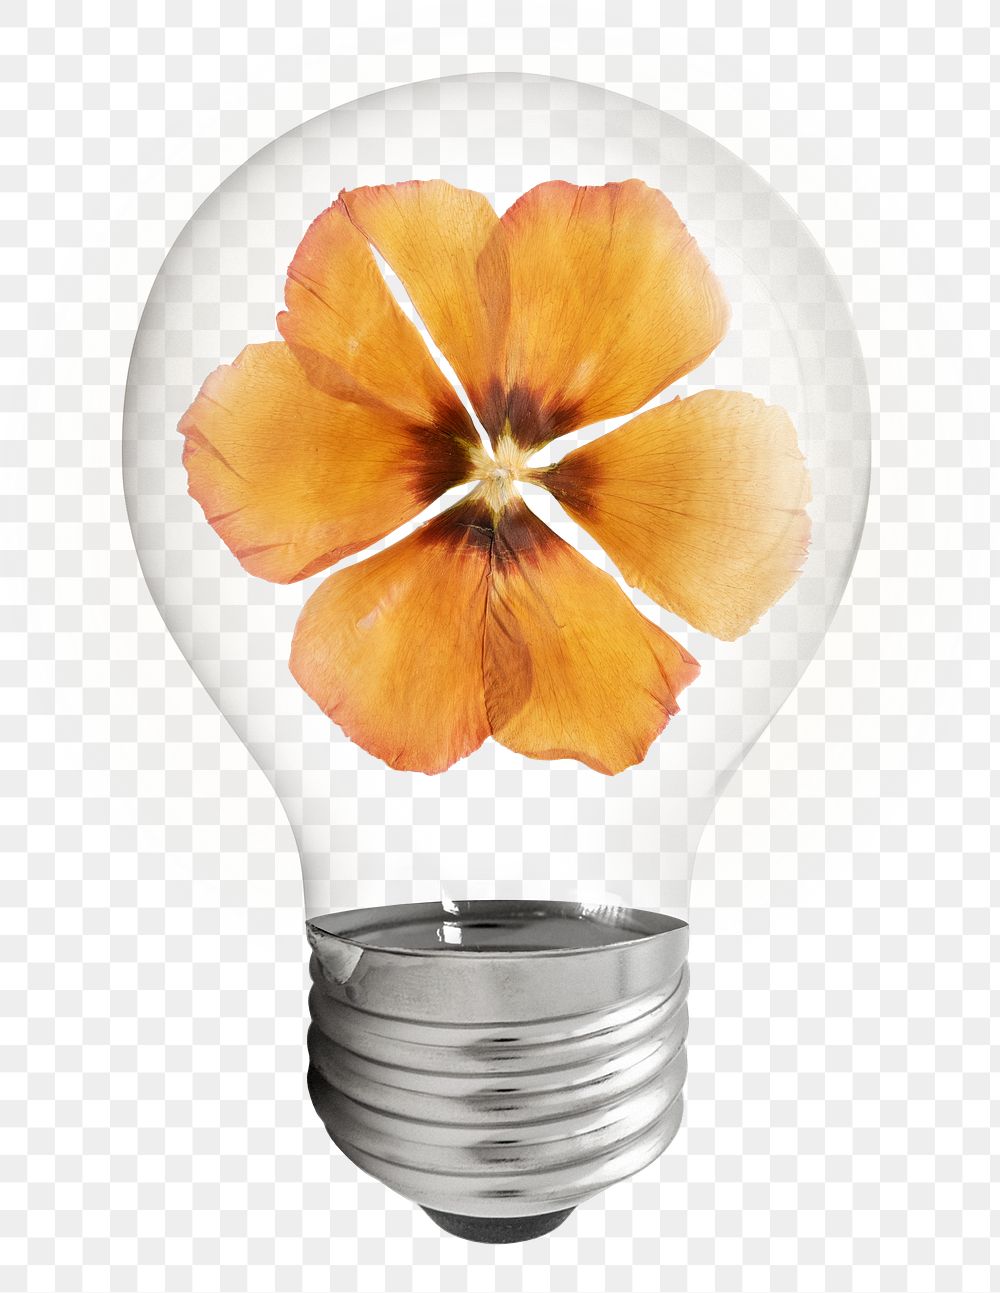 Dry anemone png sticker flower light bulb, Autumn aesthetic graphic, transparent background